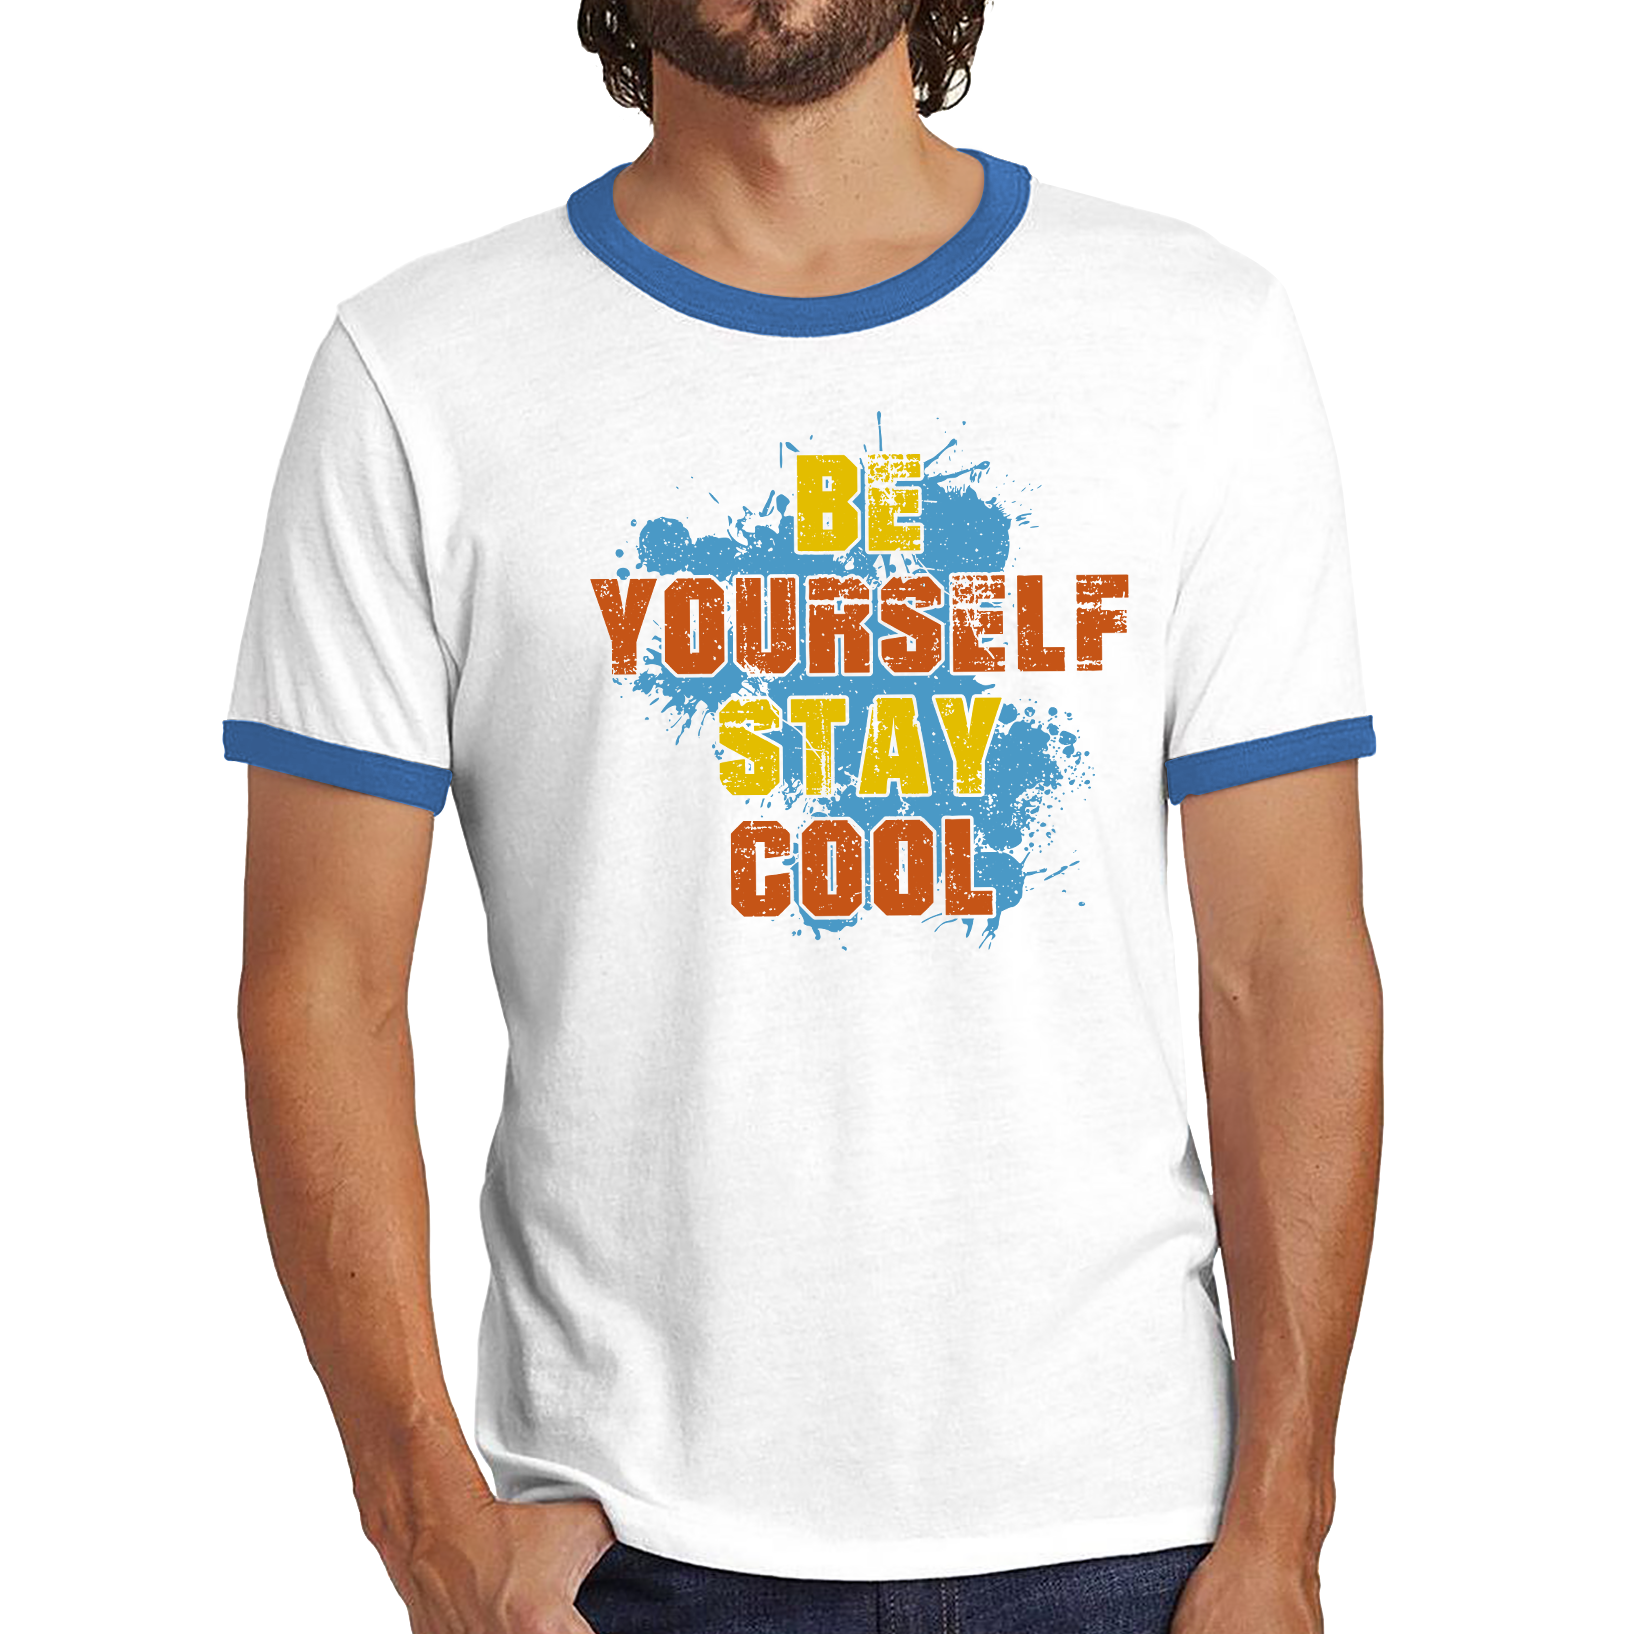 Be Yourself Stay Cool Shirt Inspirational Motivational Quote Ringer T Shirt